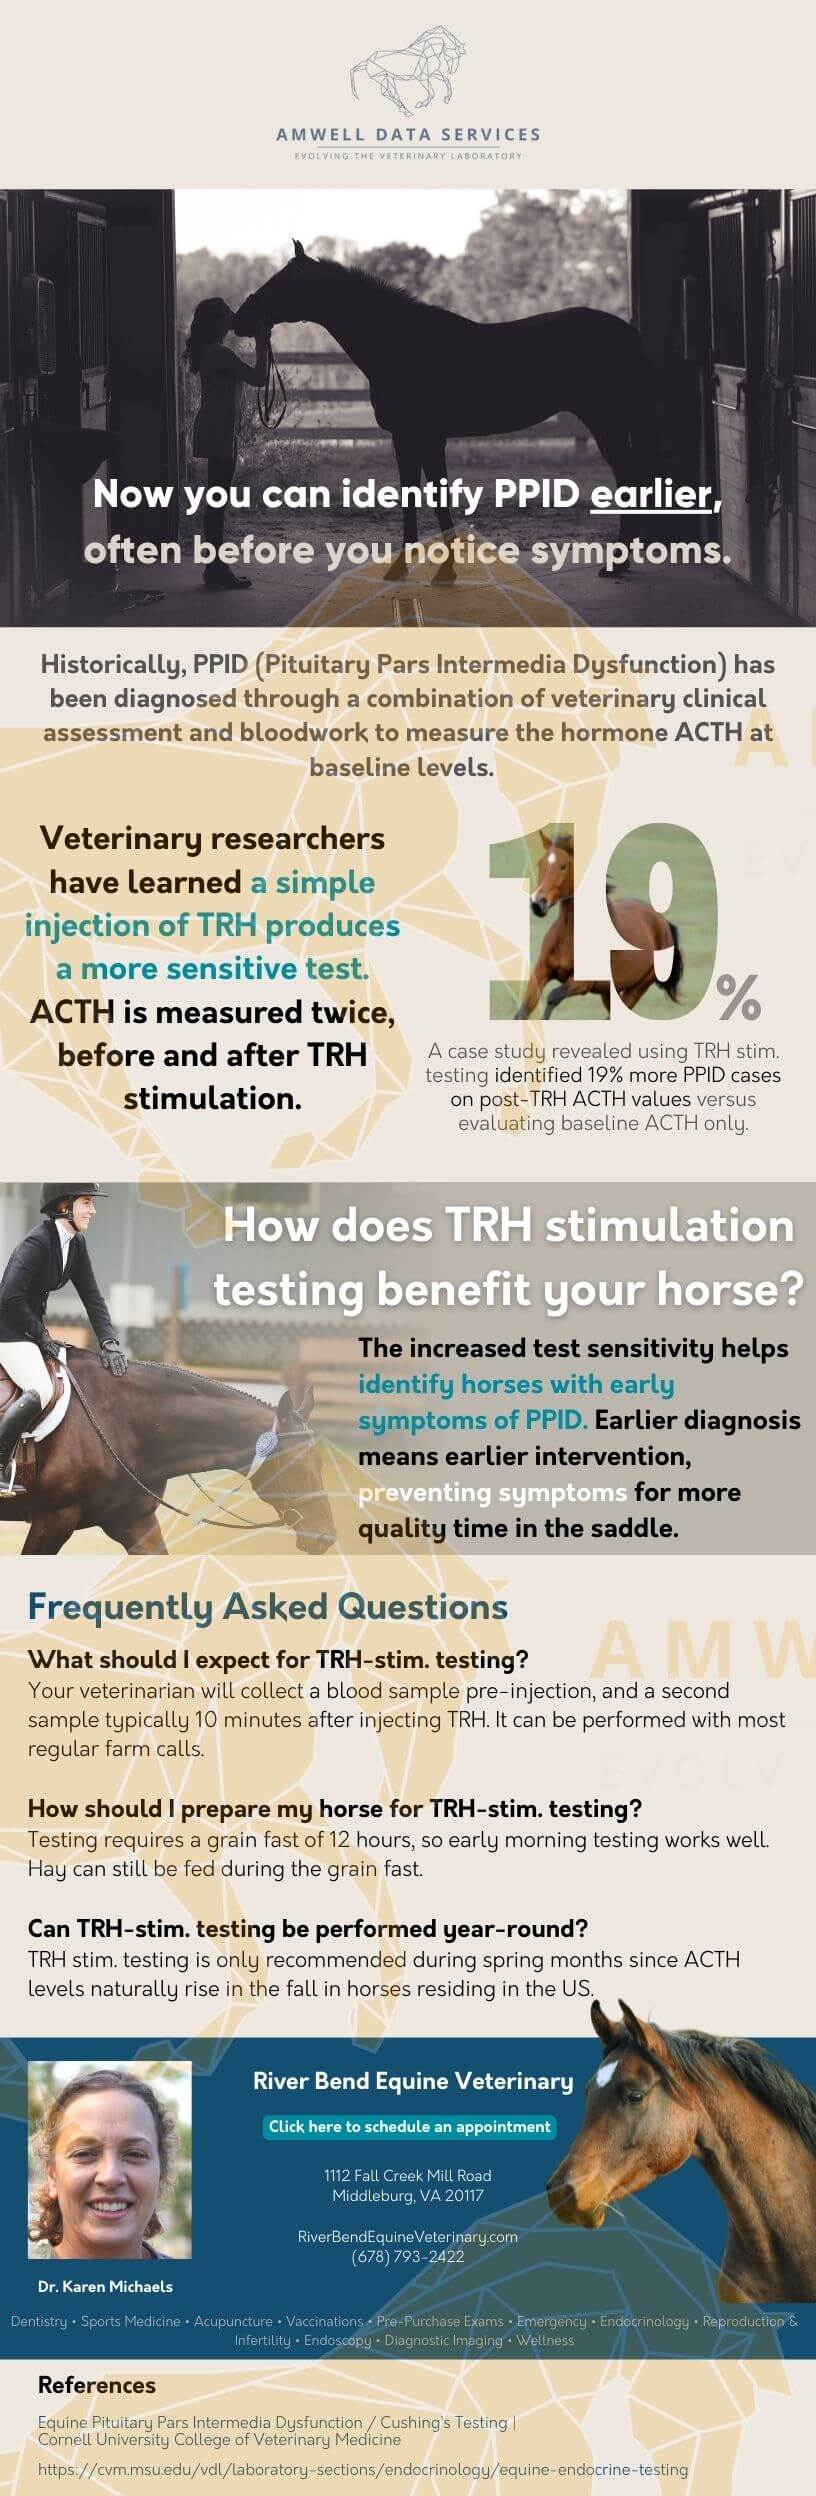 Equine Endocrine Disease #2 - TRH Stim. Email Template - Amwell Data Services LLC